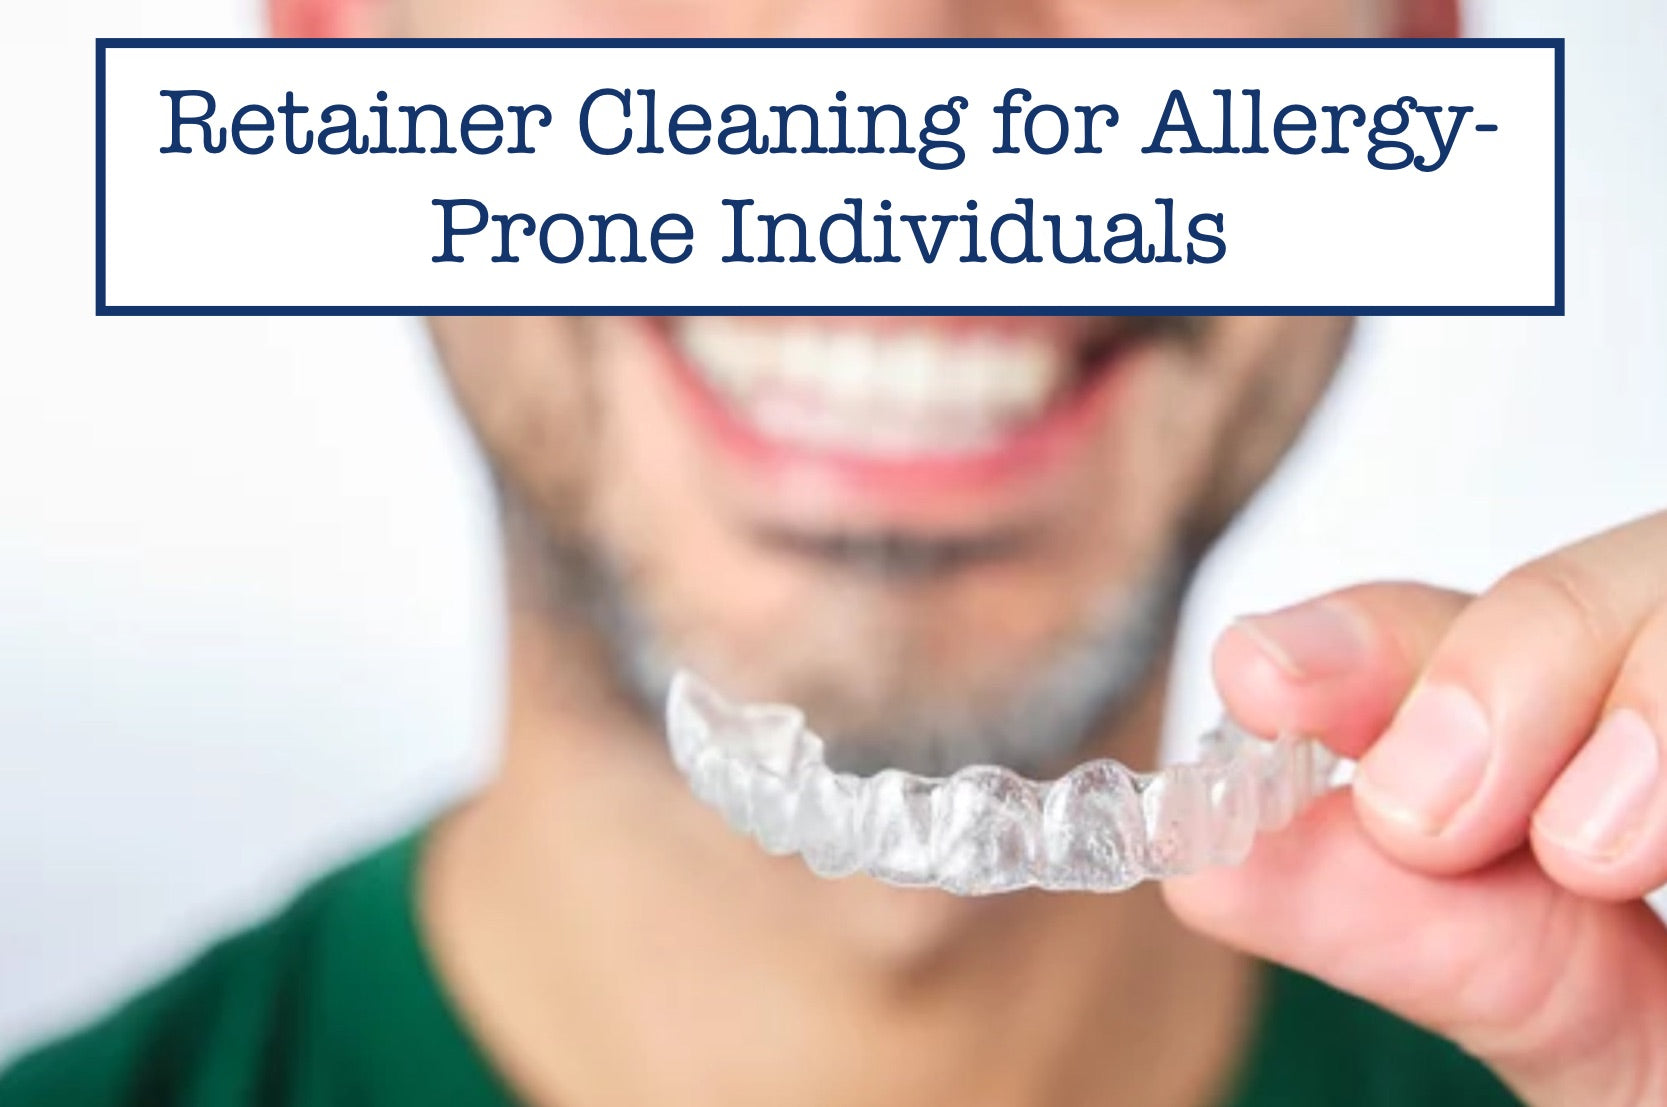 Retainer Cleaning for Allergy-Prone Individuals